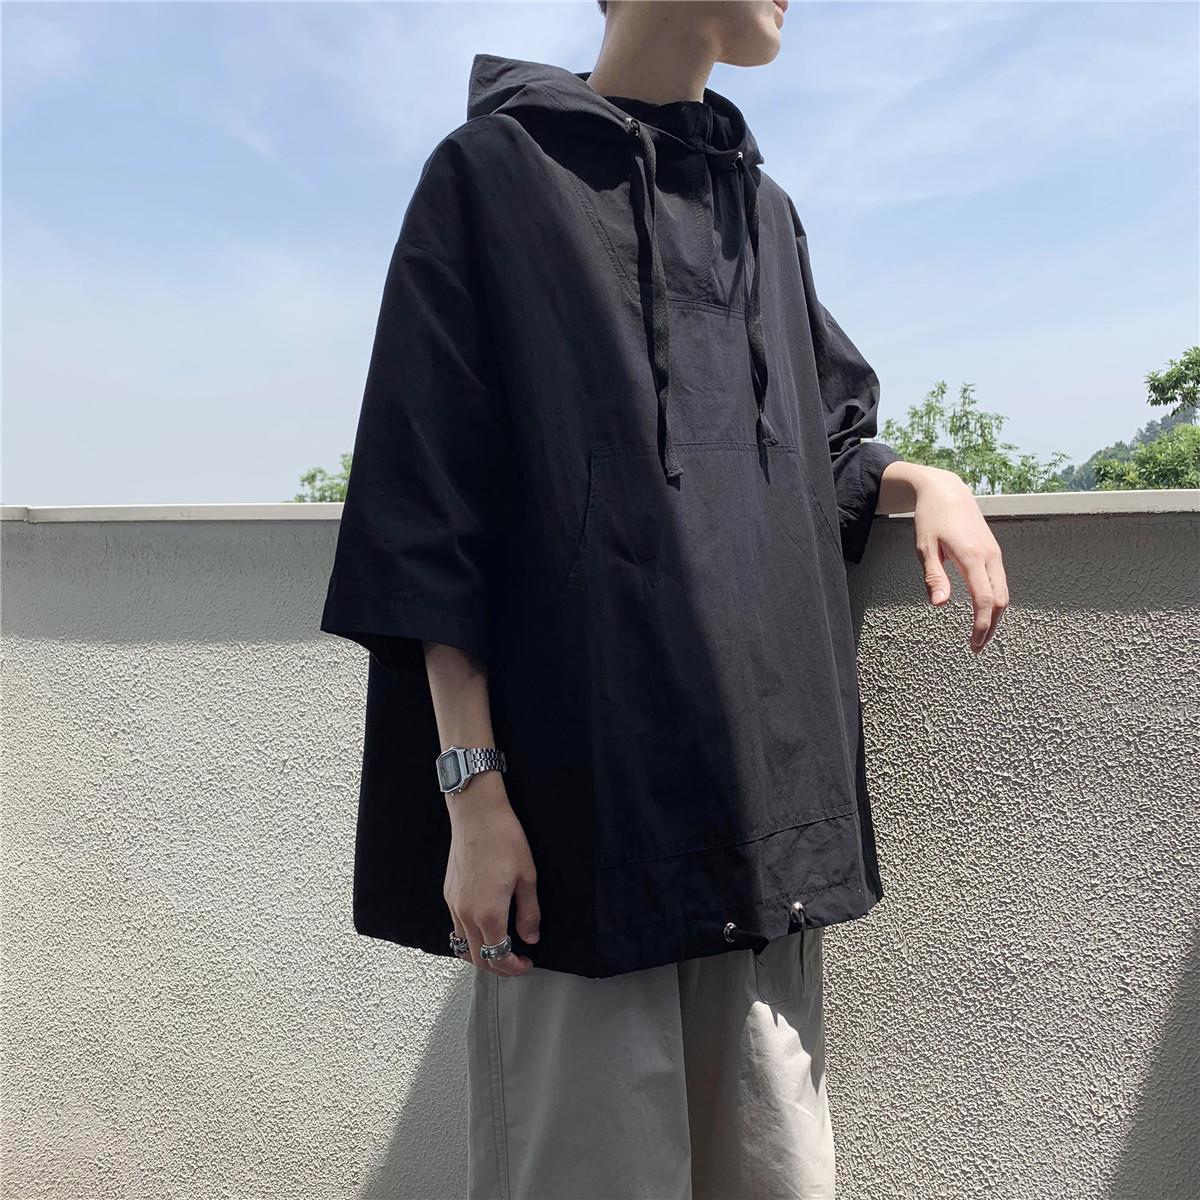 Summer sweater men's shirt loose Korean fashion student solid color 5-sleeve casual hooded Pullover short sleeve T-shirt